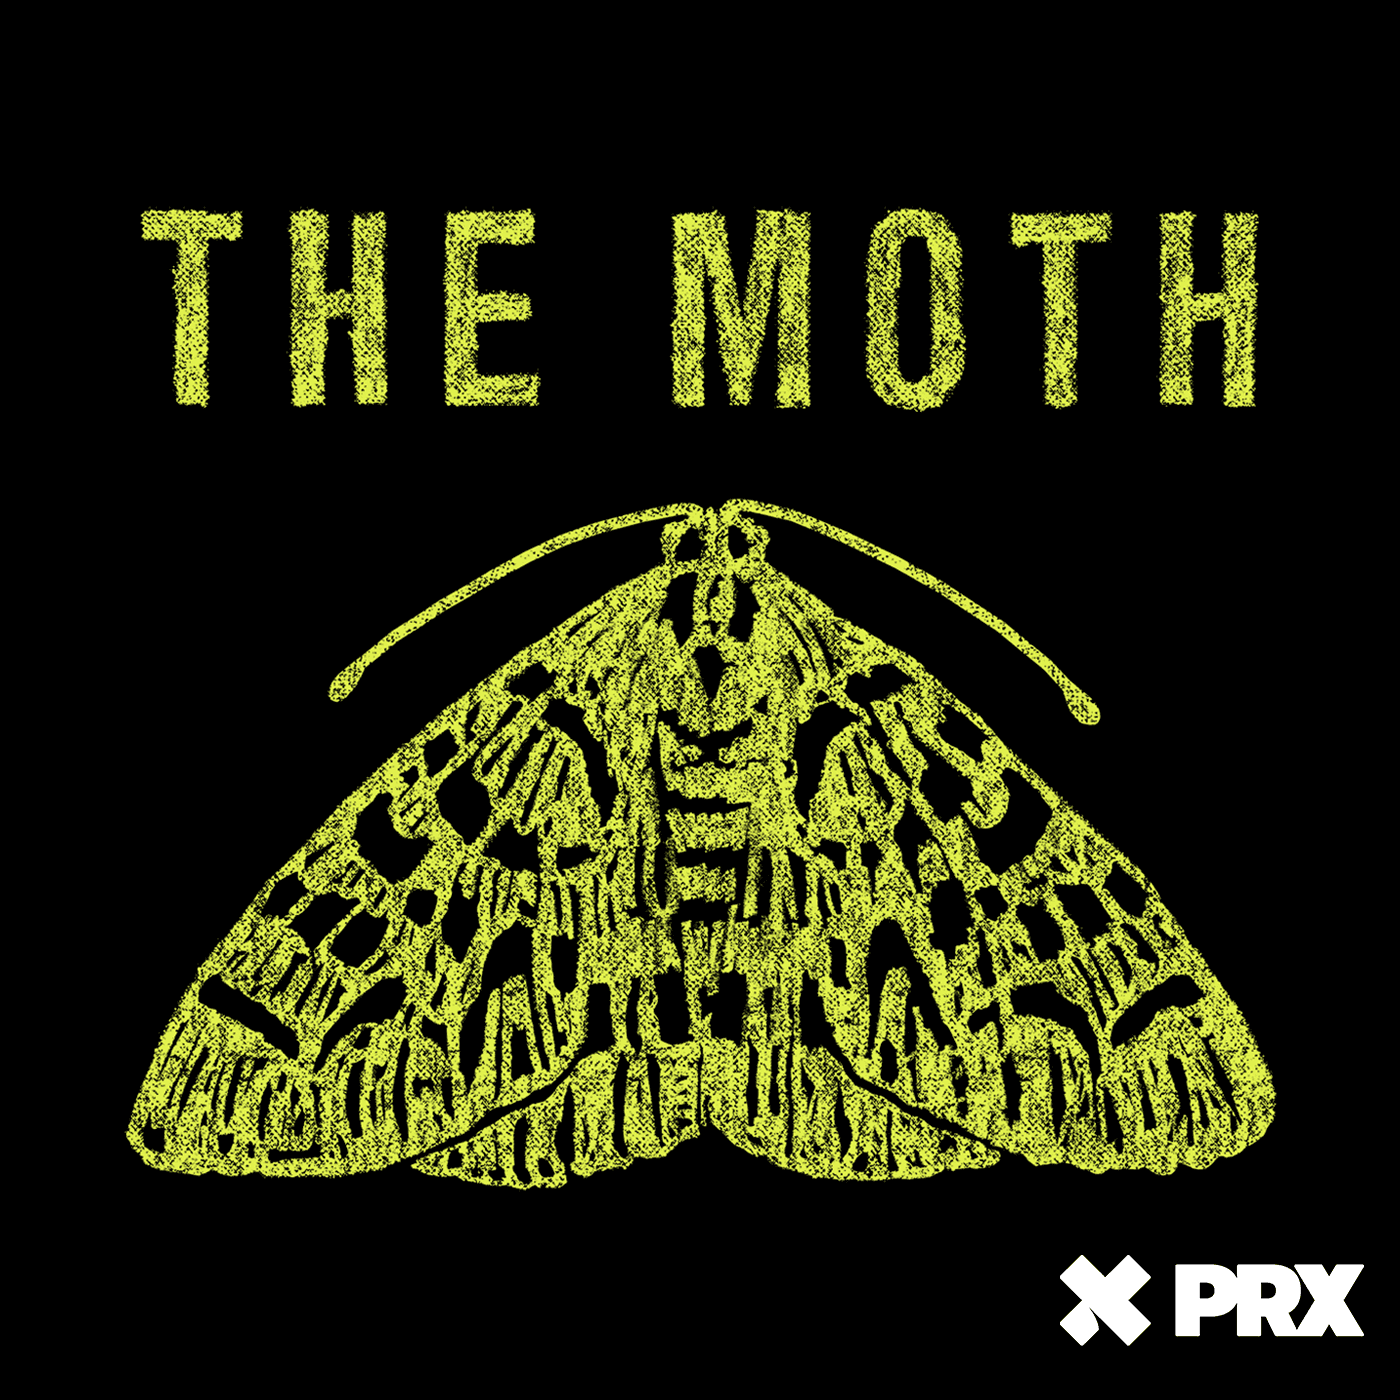 Thumbnail for "The Moth Podcast: Opening the Page".